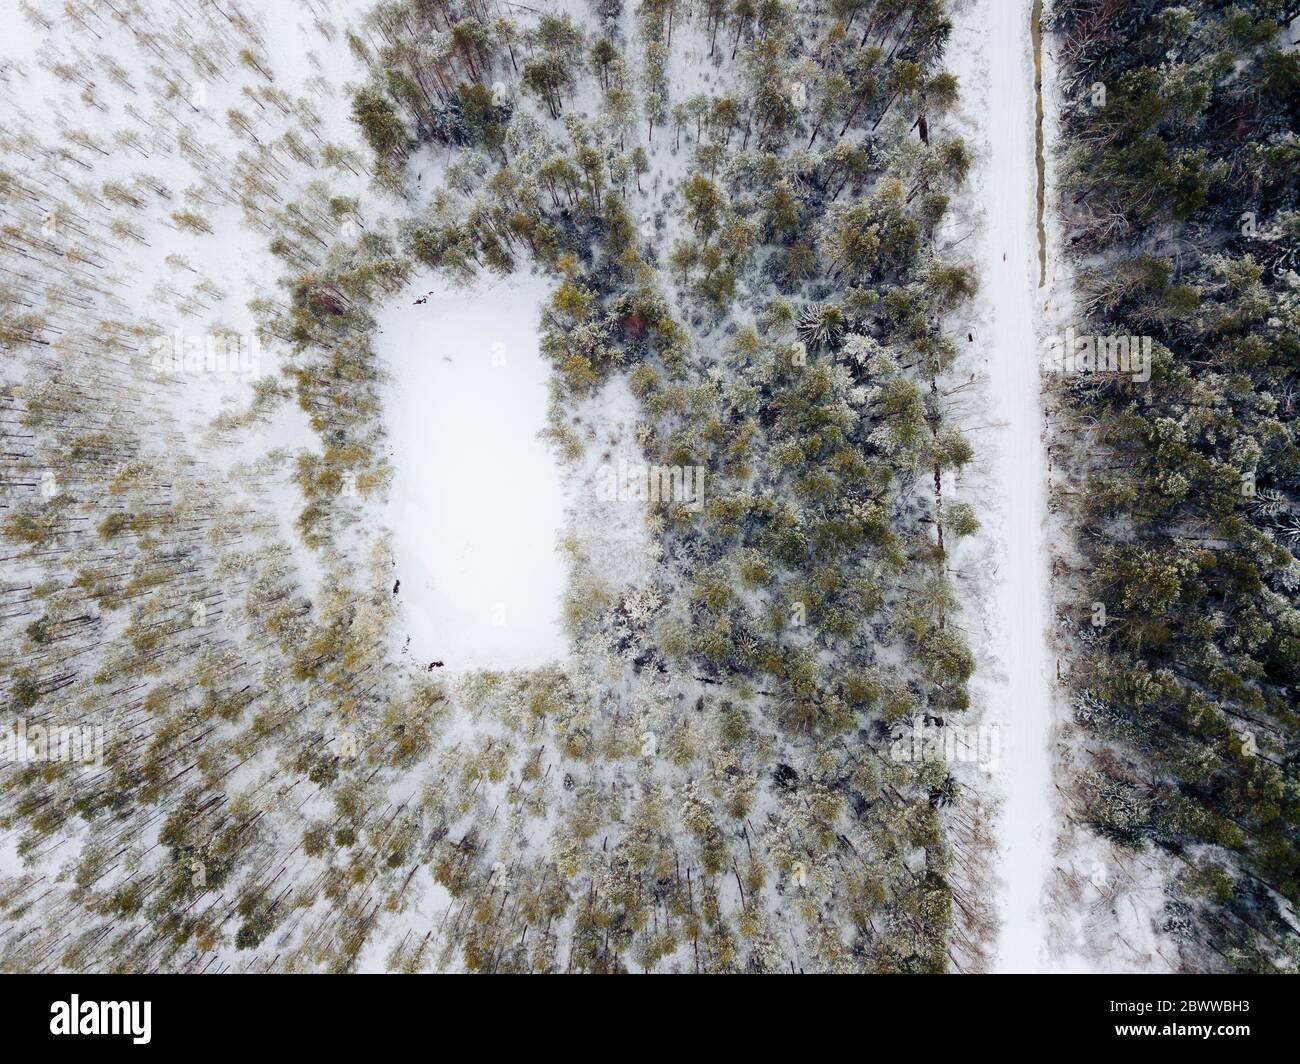 Russia, Leningrad Oblast, Aerial view of snow-covered pond and road in winter forest Stock Photo